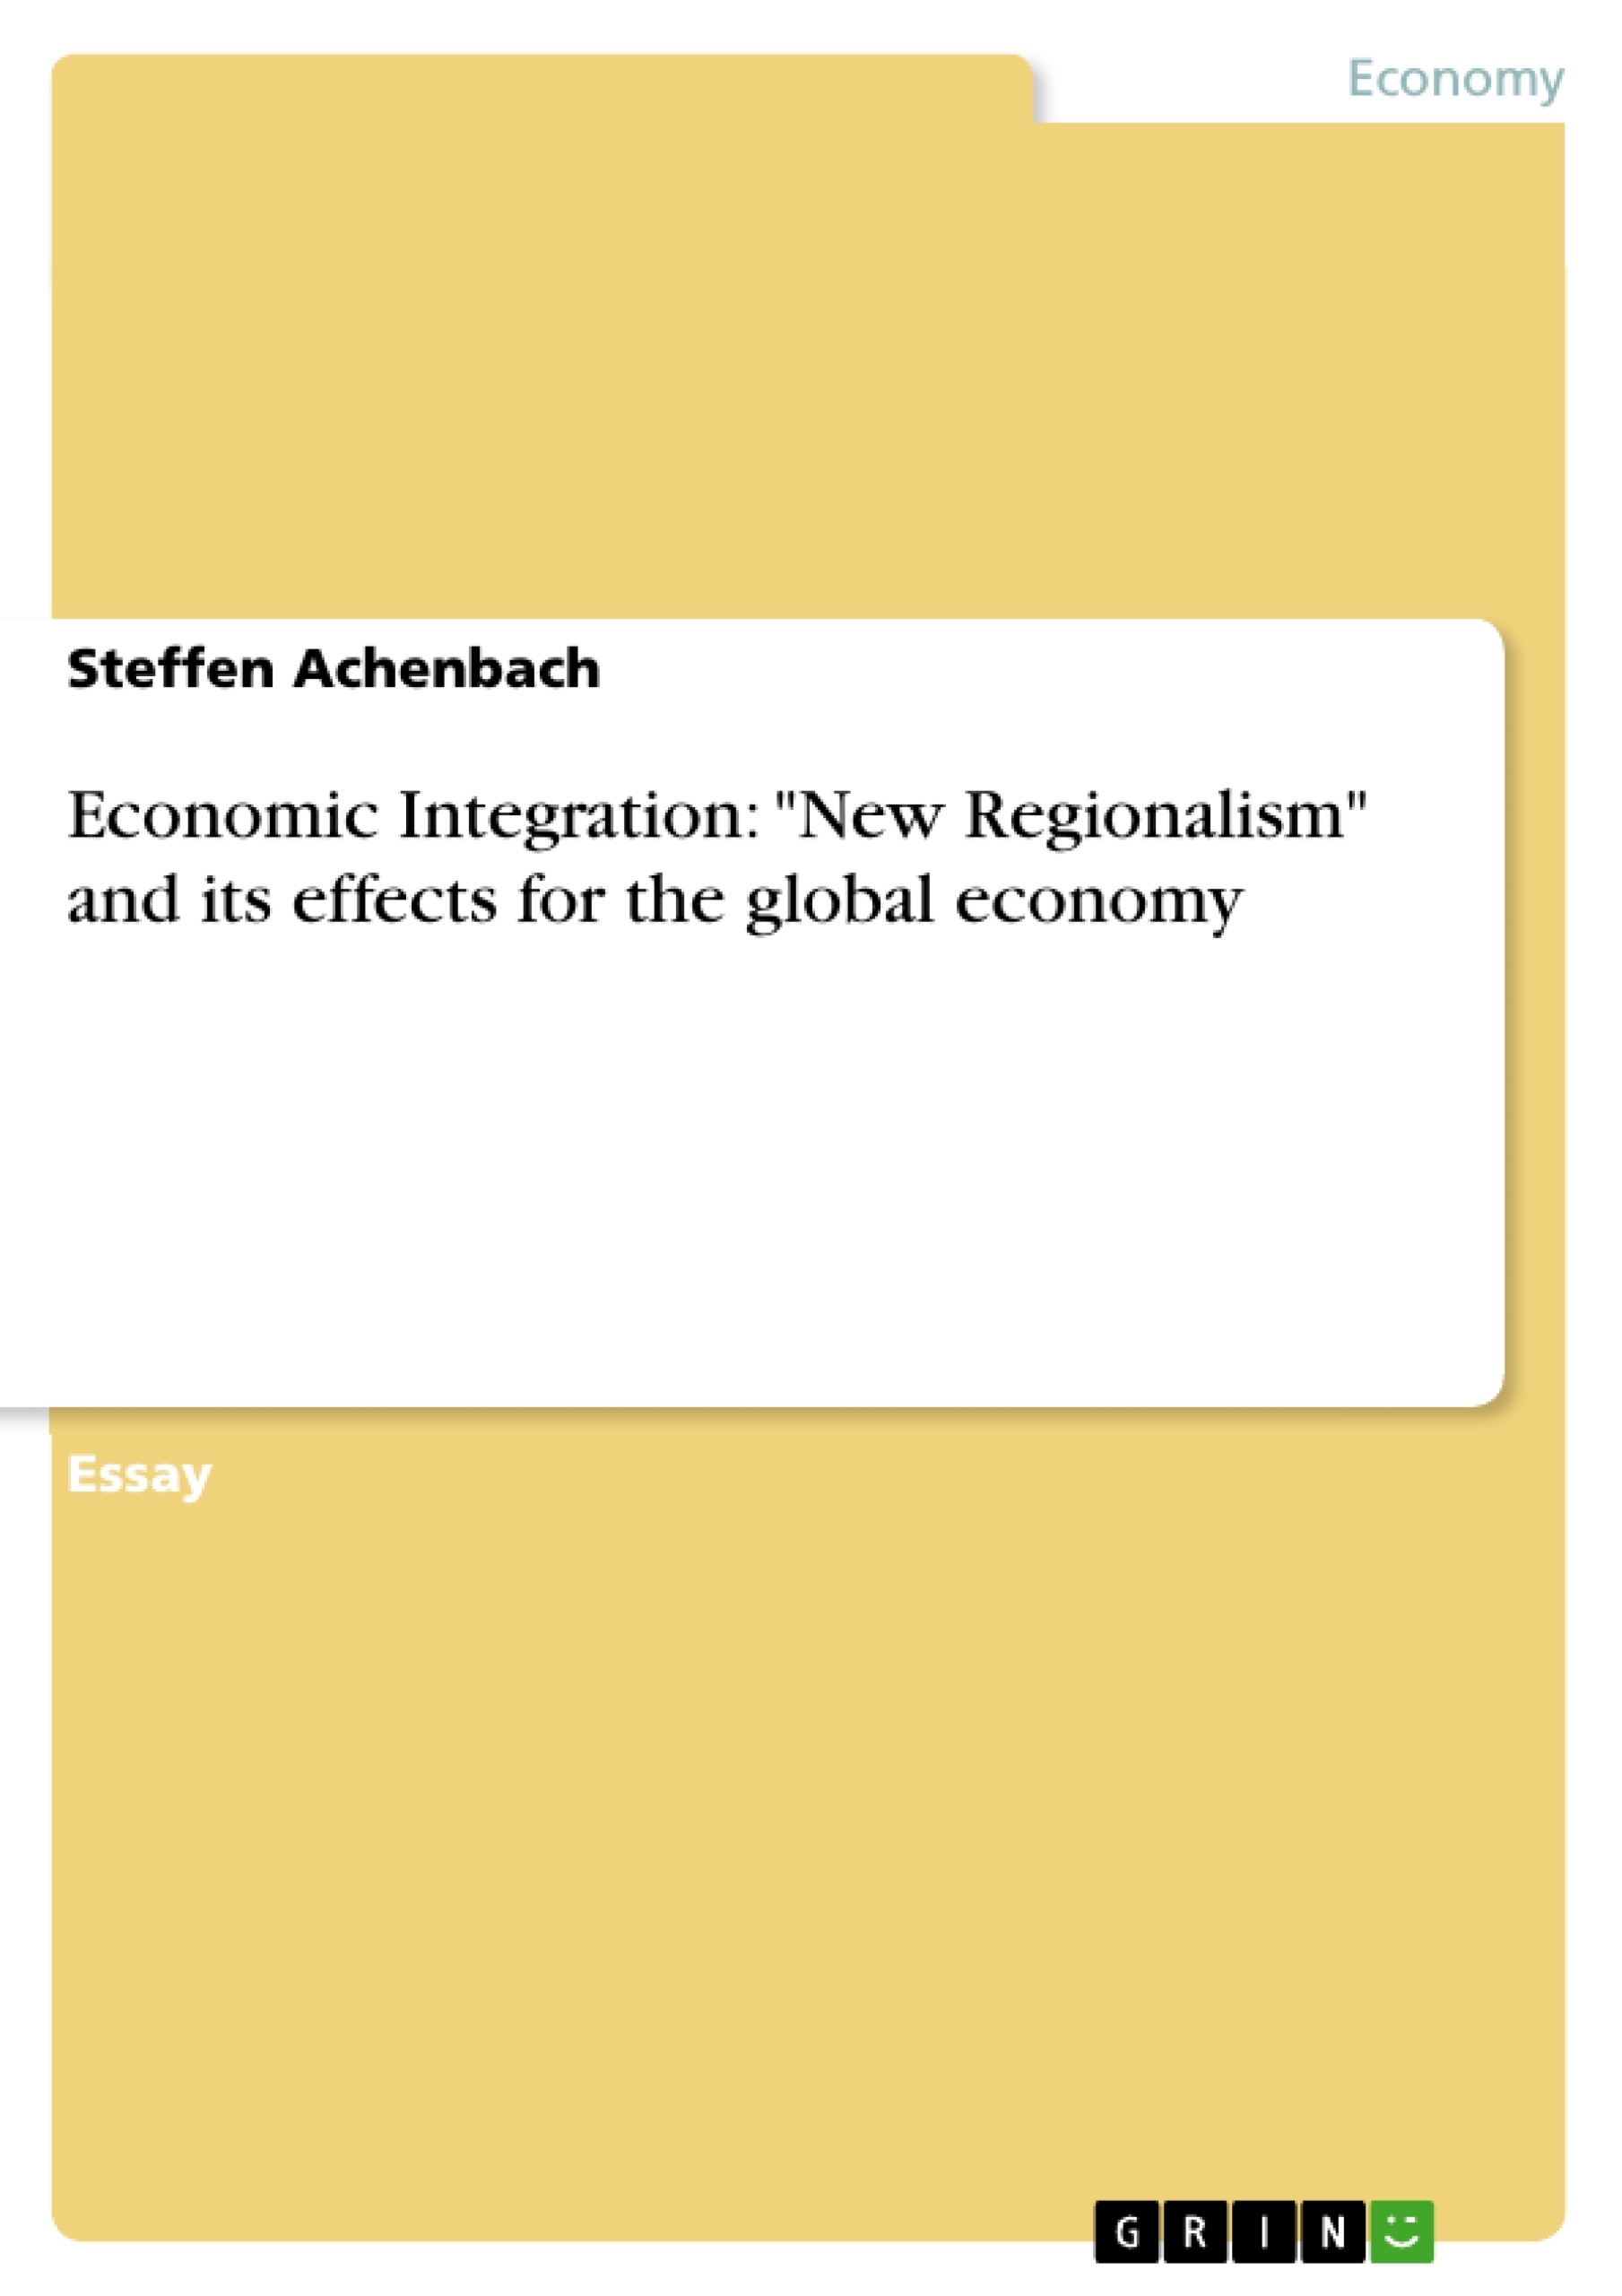 Title: Economic Integration: "New Regionalism" and its effects for the global economy